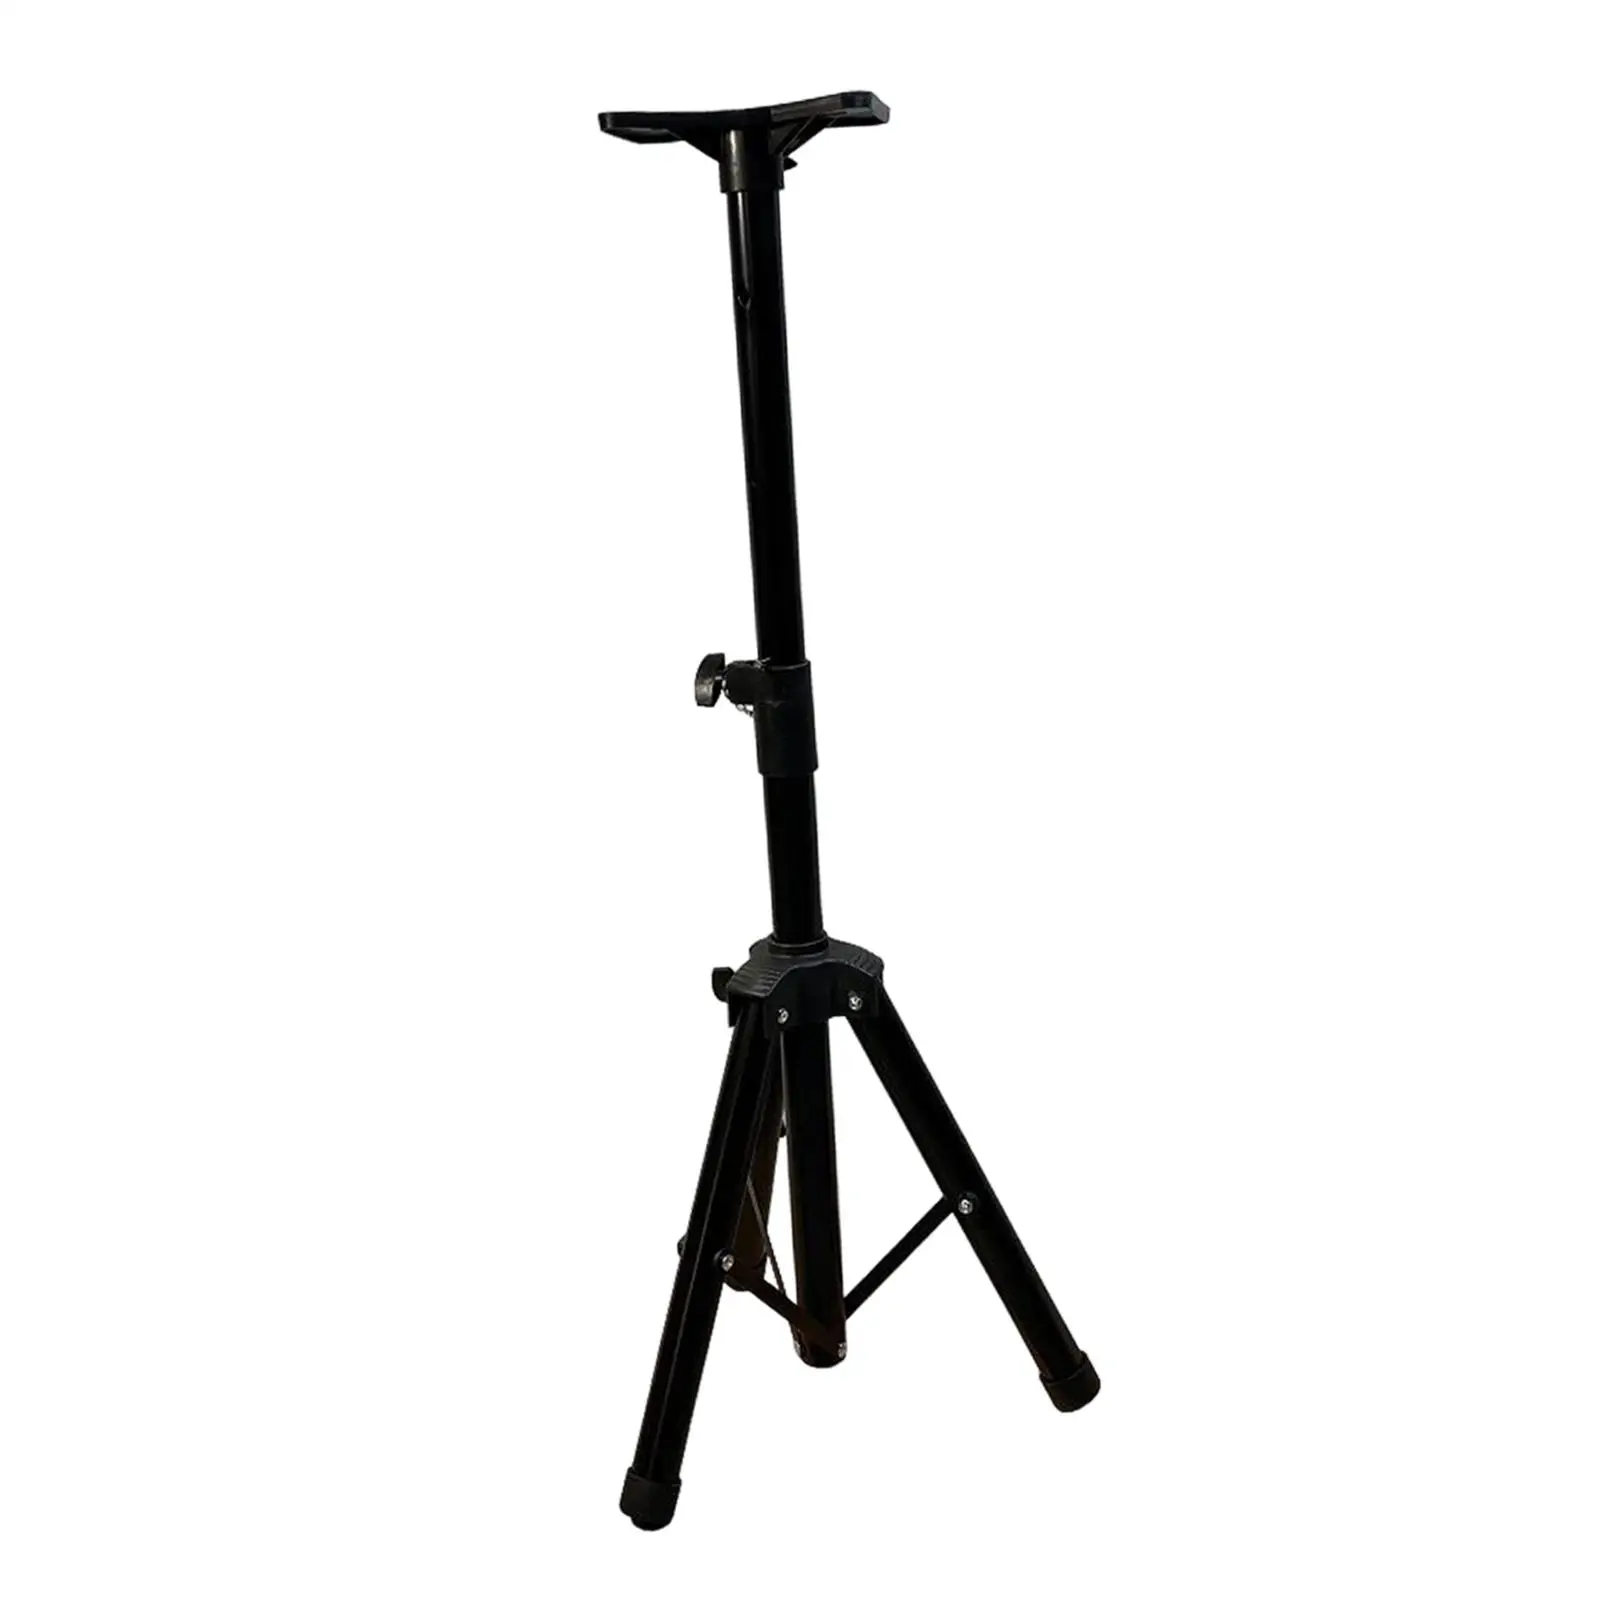 Target Stand for Backyard 45,38,33,30inch Stable Improve Accuracy for Indoor